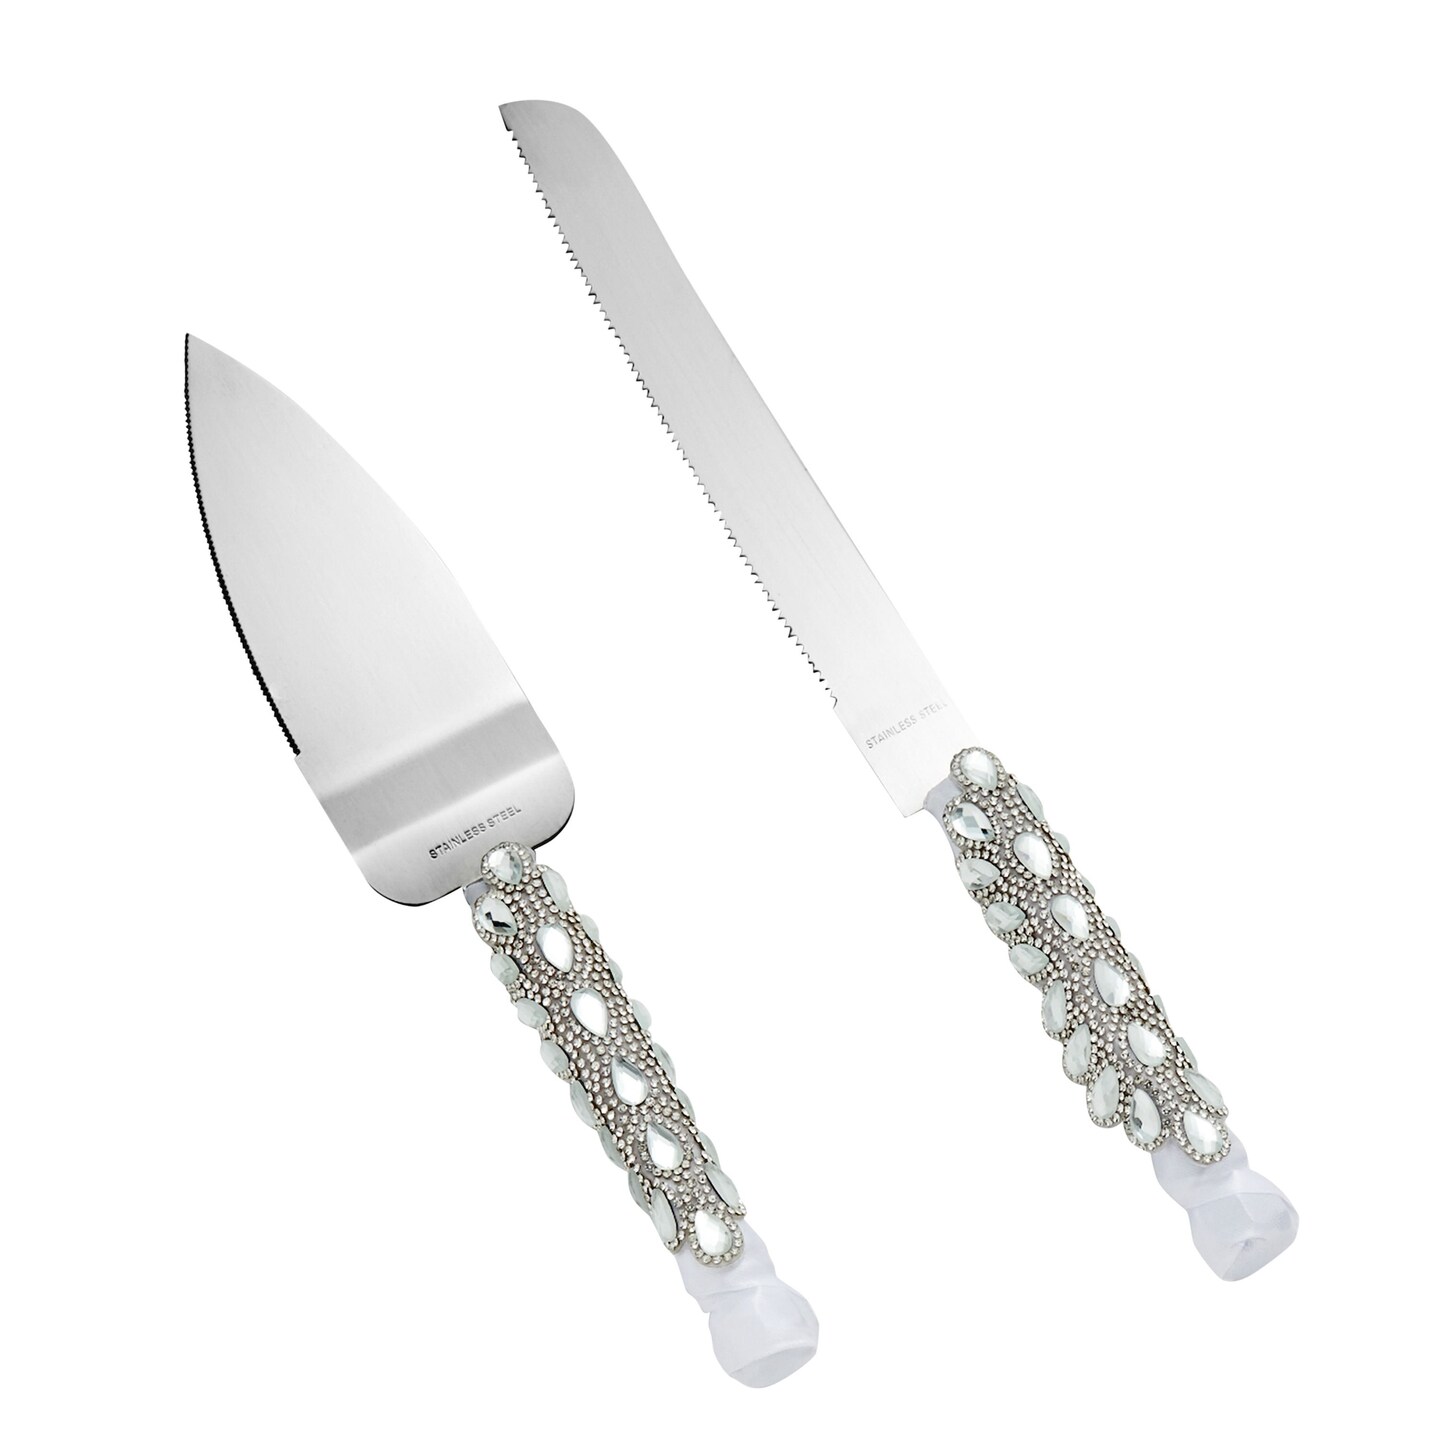 Wedding Cake Knife and Server Set with Knife and Server, Embellished with Faux Crystals, Diamonds, and Ribbon, Sturdy Stainless Steel, Chrome Mirror Finish Tips